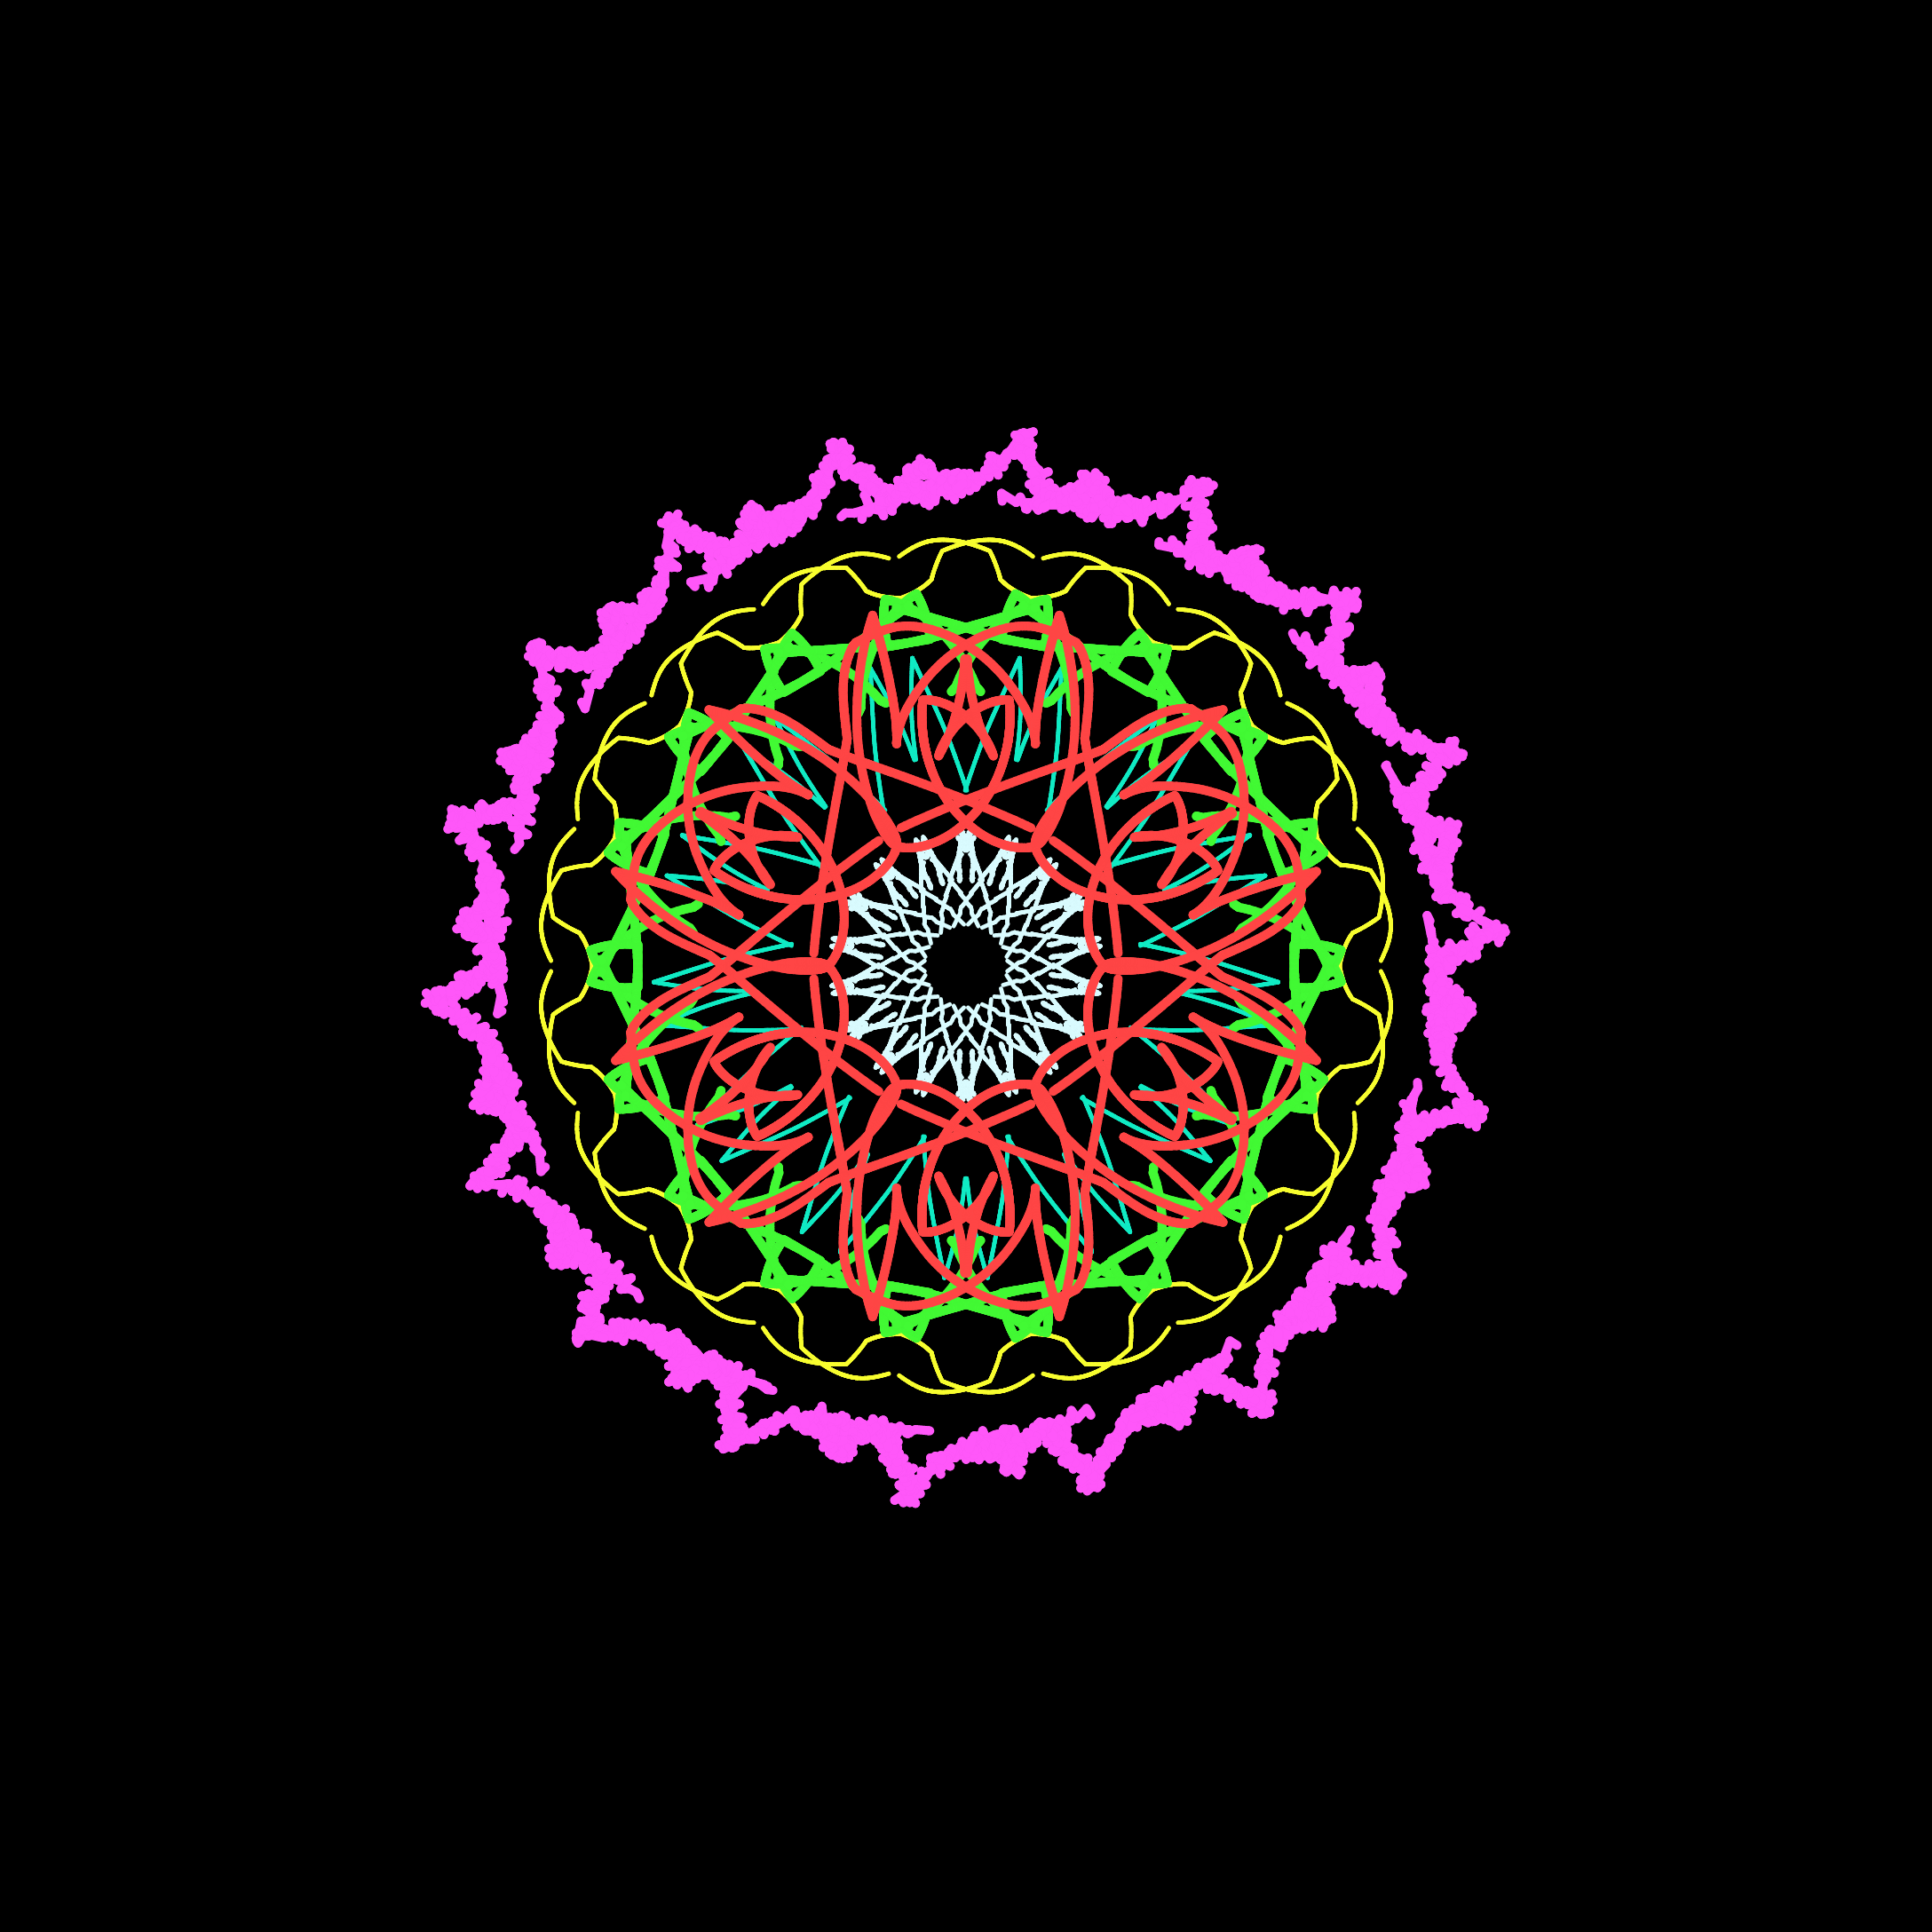 Radial_20180315_091434.png